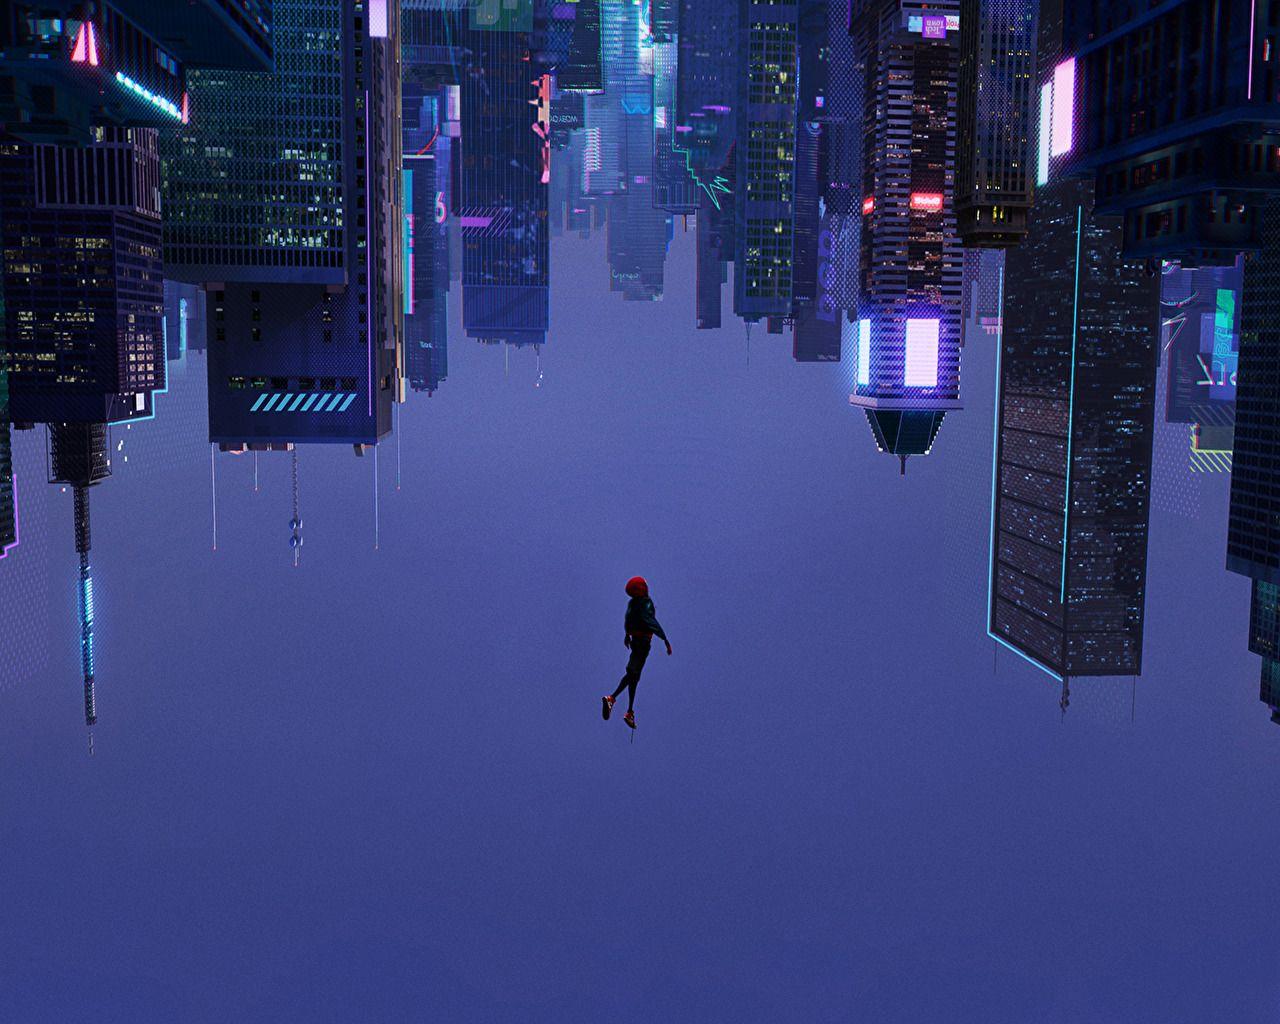 into the spider verse download free